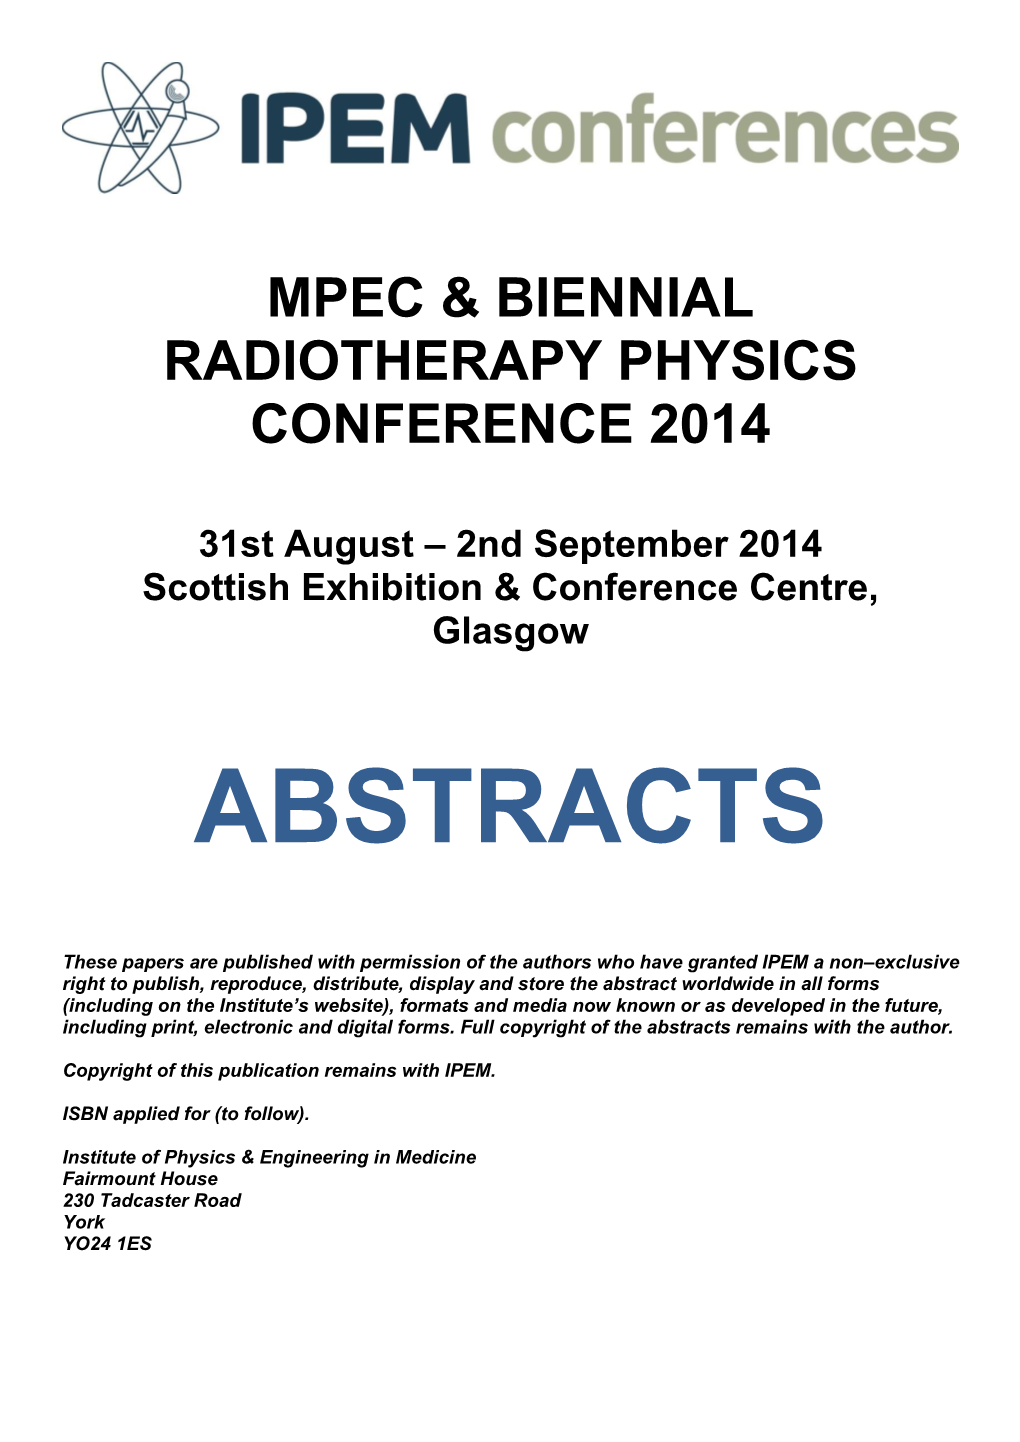 Biennial Radiotherapy Physics Conference 2014